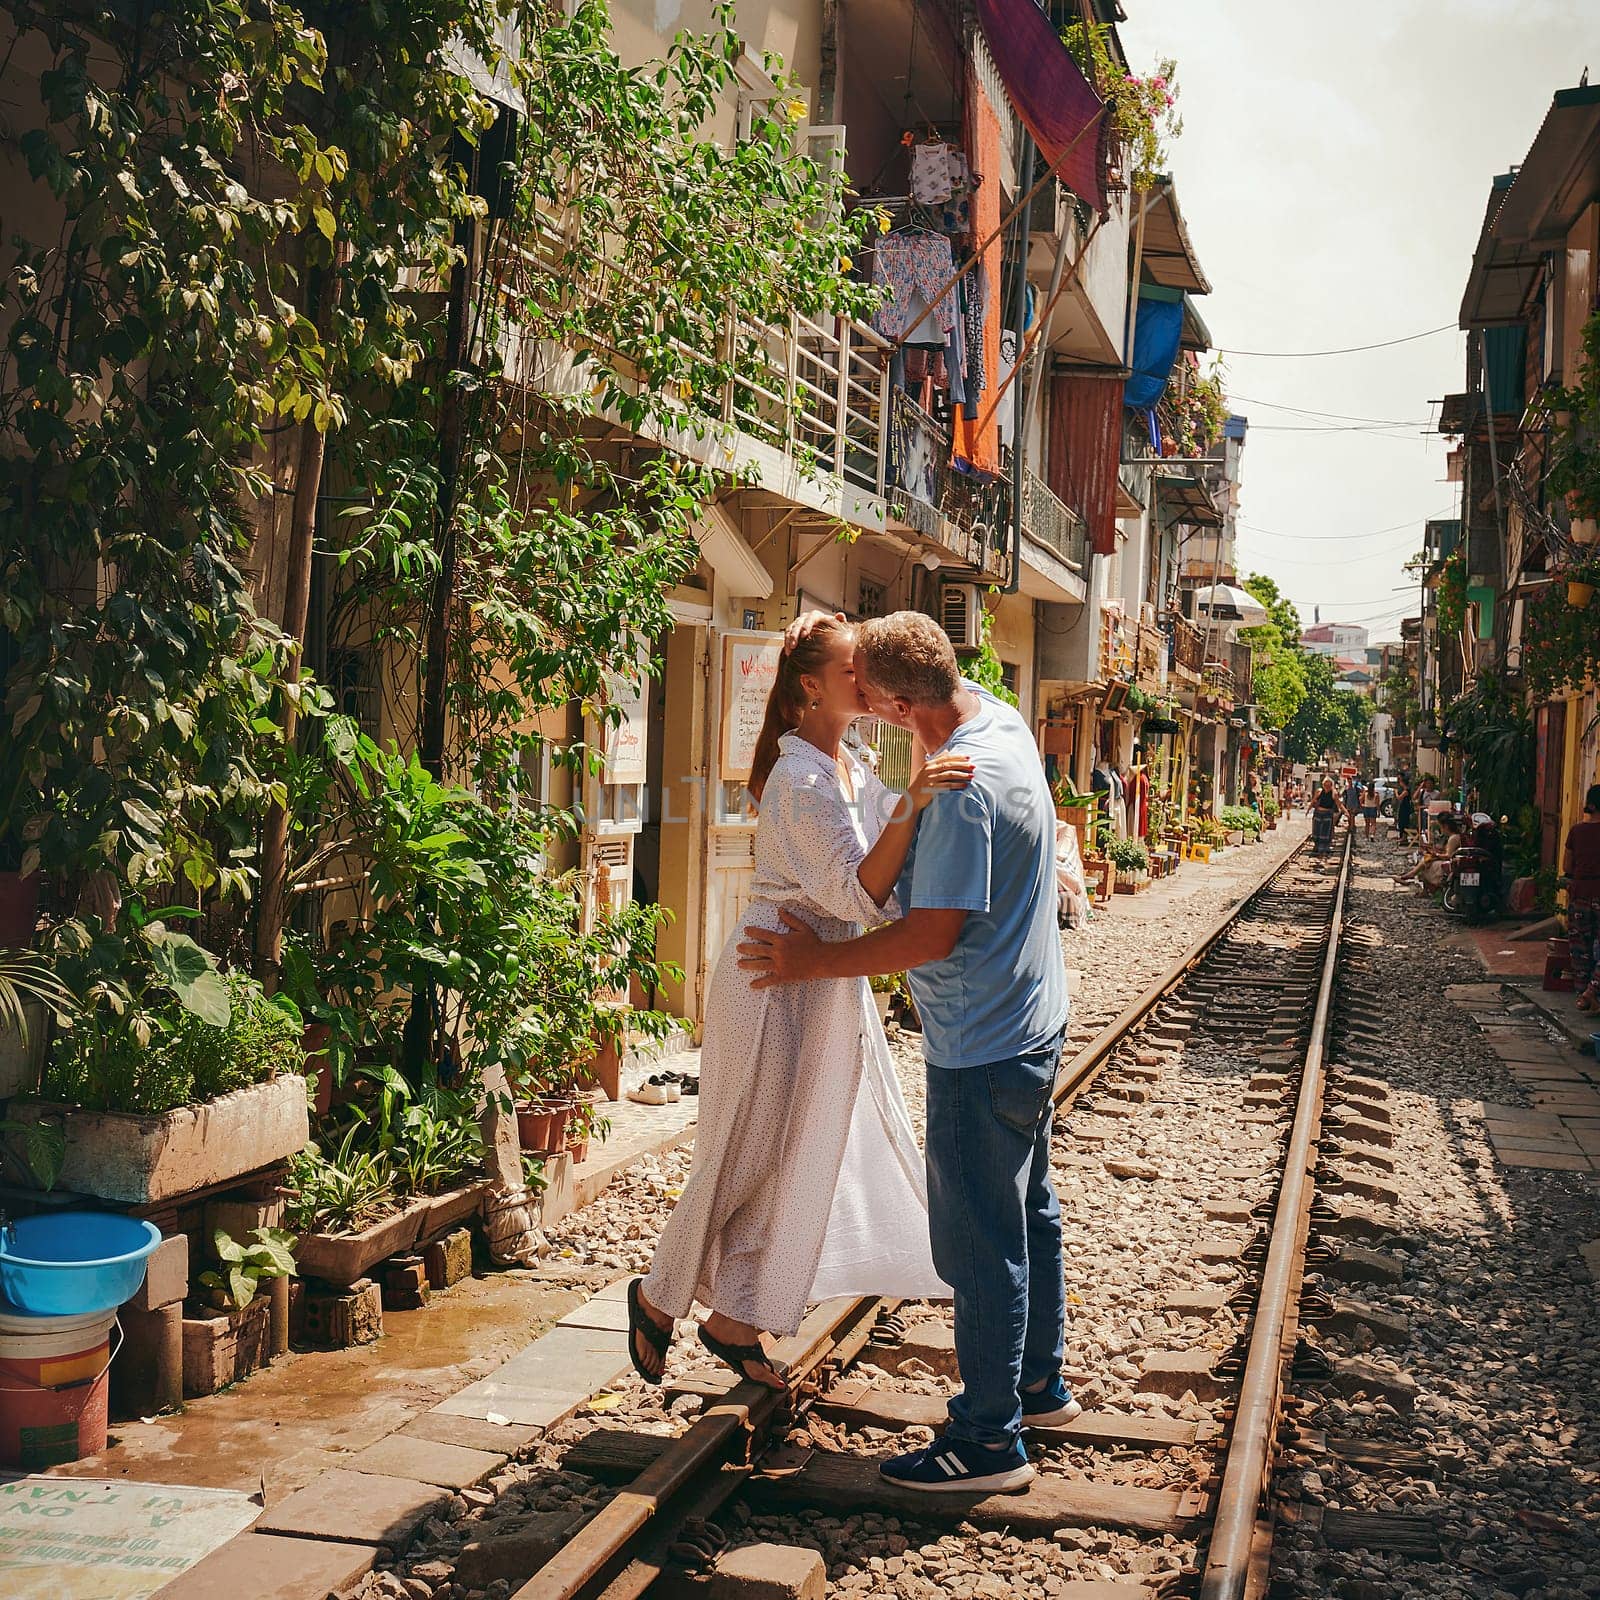 Theres always time for a kiss. a happy couple sharing a romantic moment on the train tracks in the streets of Vietnam